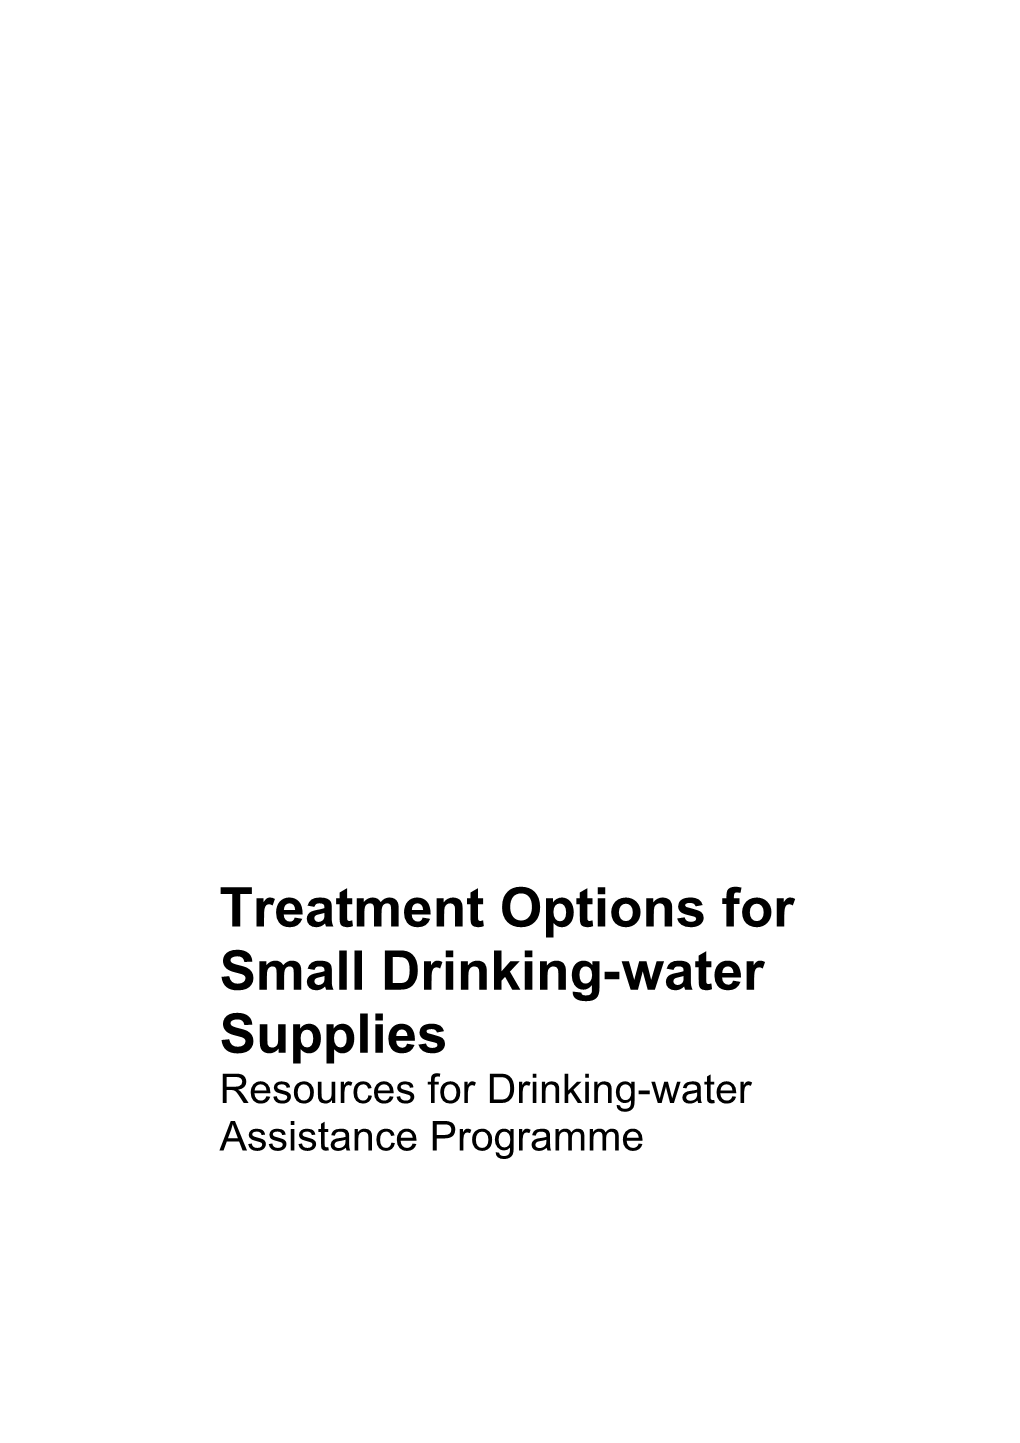 Treatment Options for Small Drinking-Water Supplies: Resources for Drinking-Water Assistance